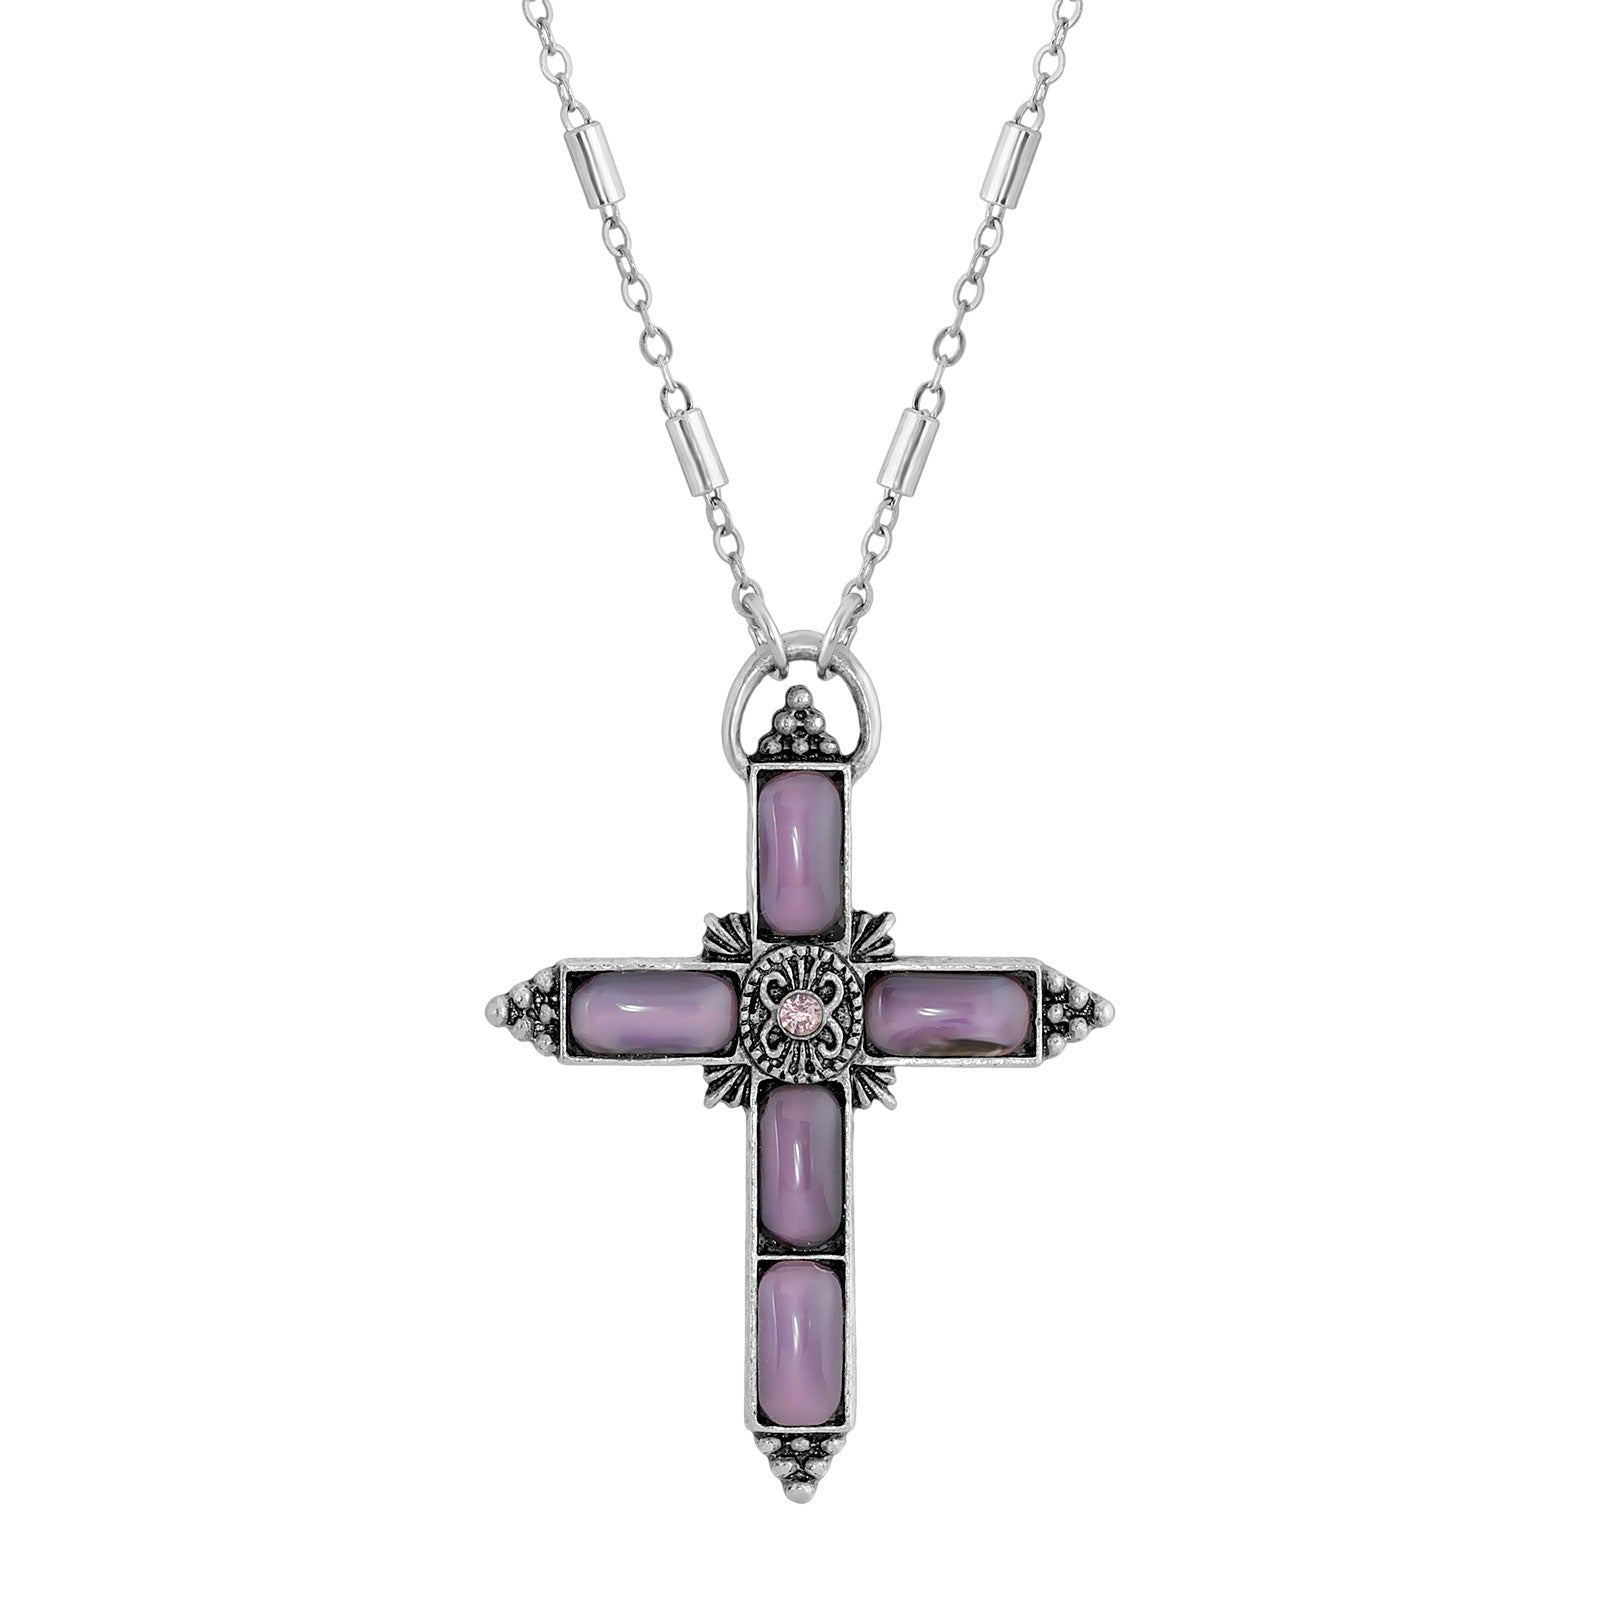 Crystal Baguette Crucifix Necklace - Sterling Silver Pendant on 18